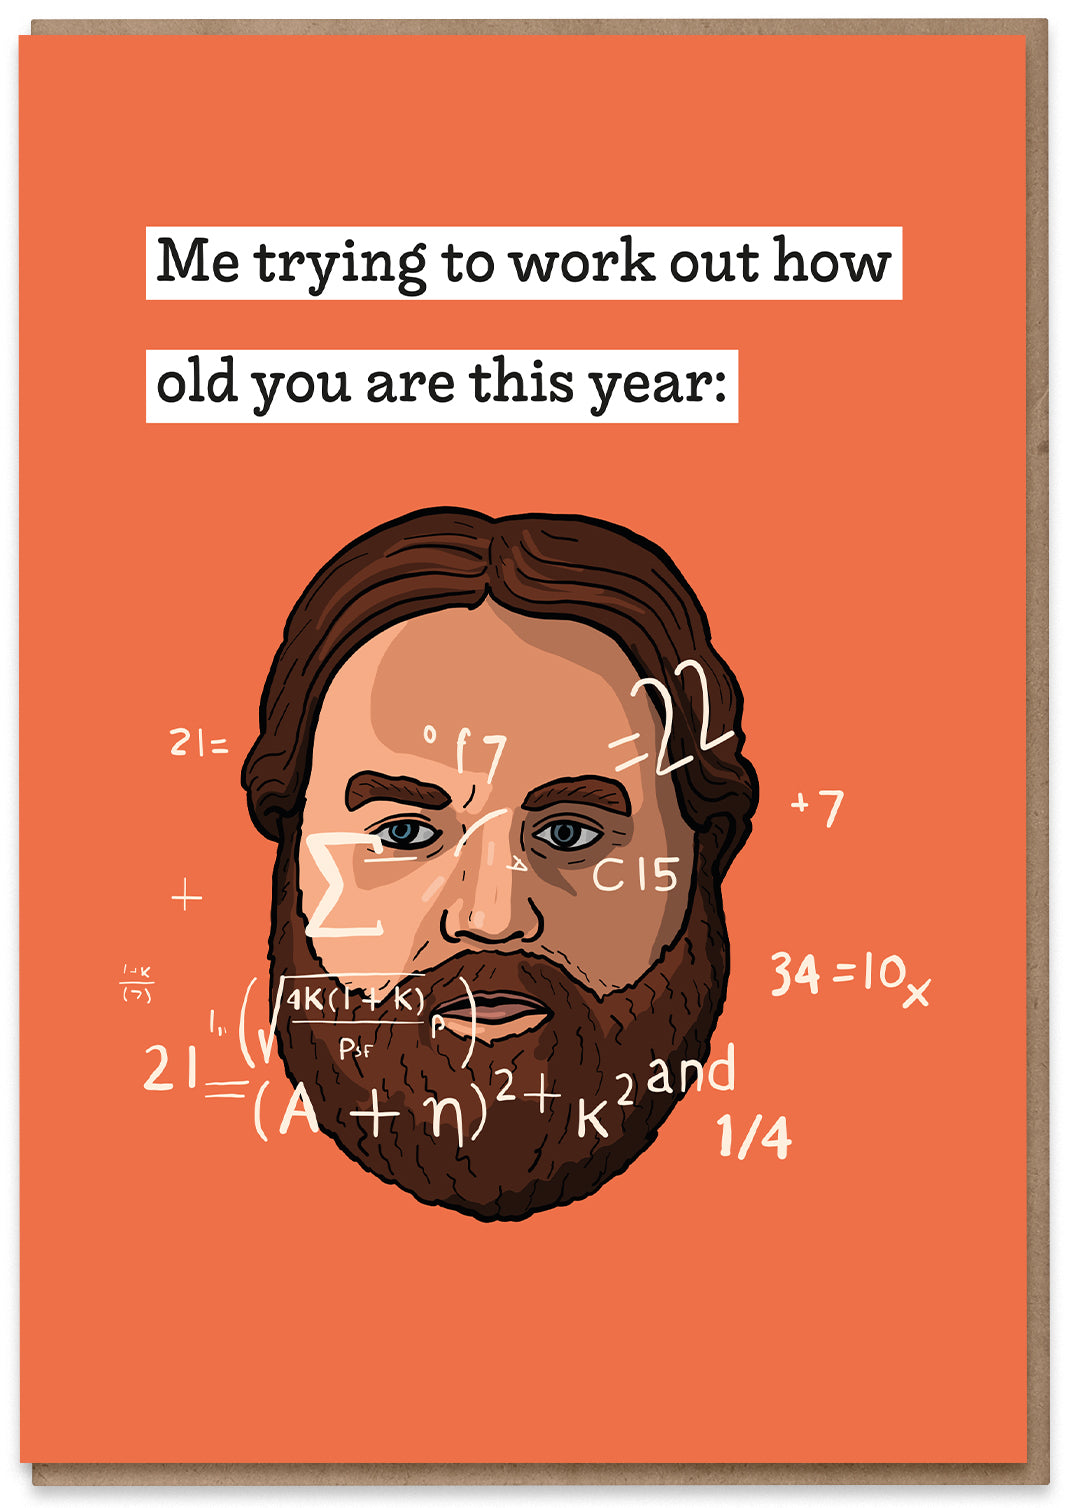 Calculating Your Age